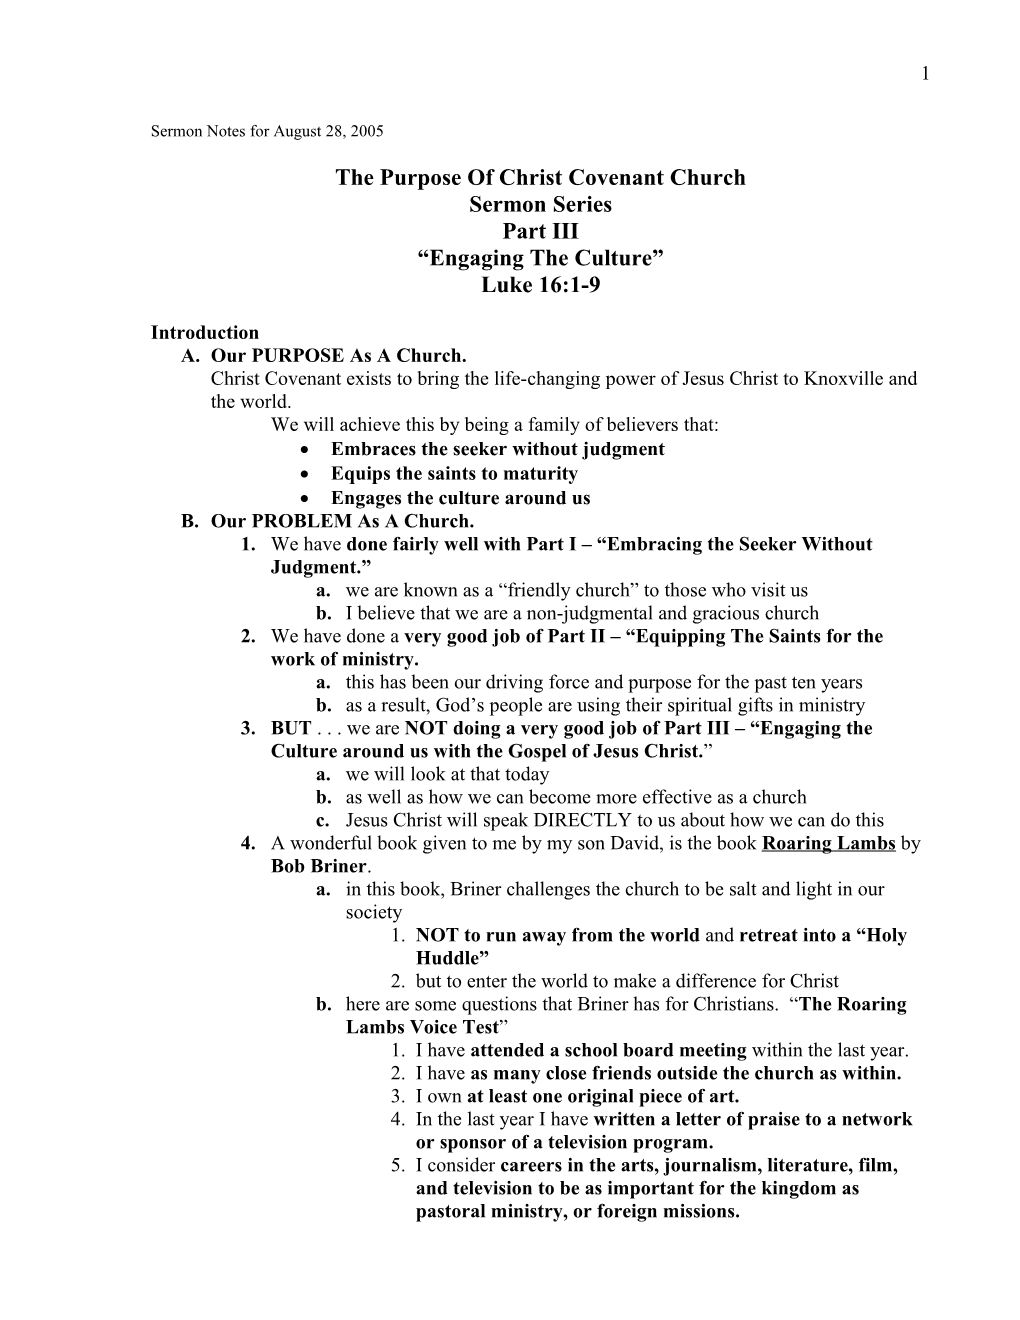 Sermon Notes for August 28, 2005